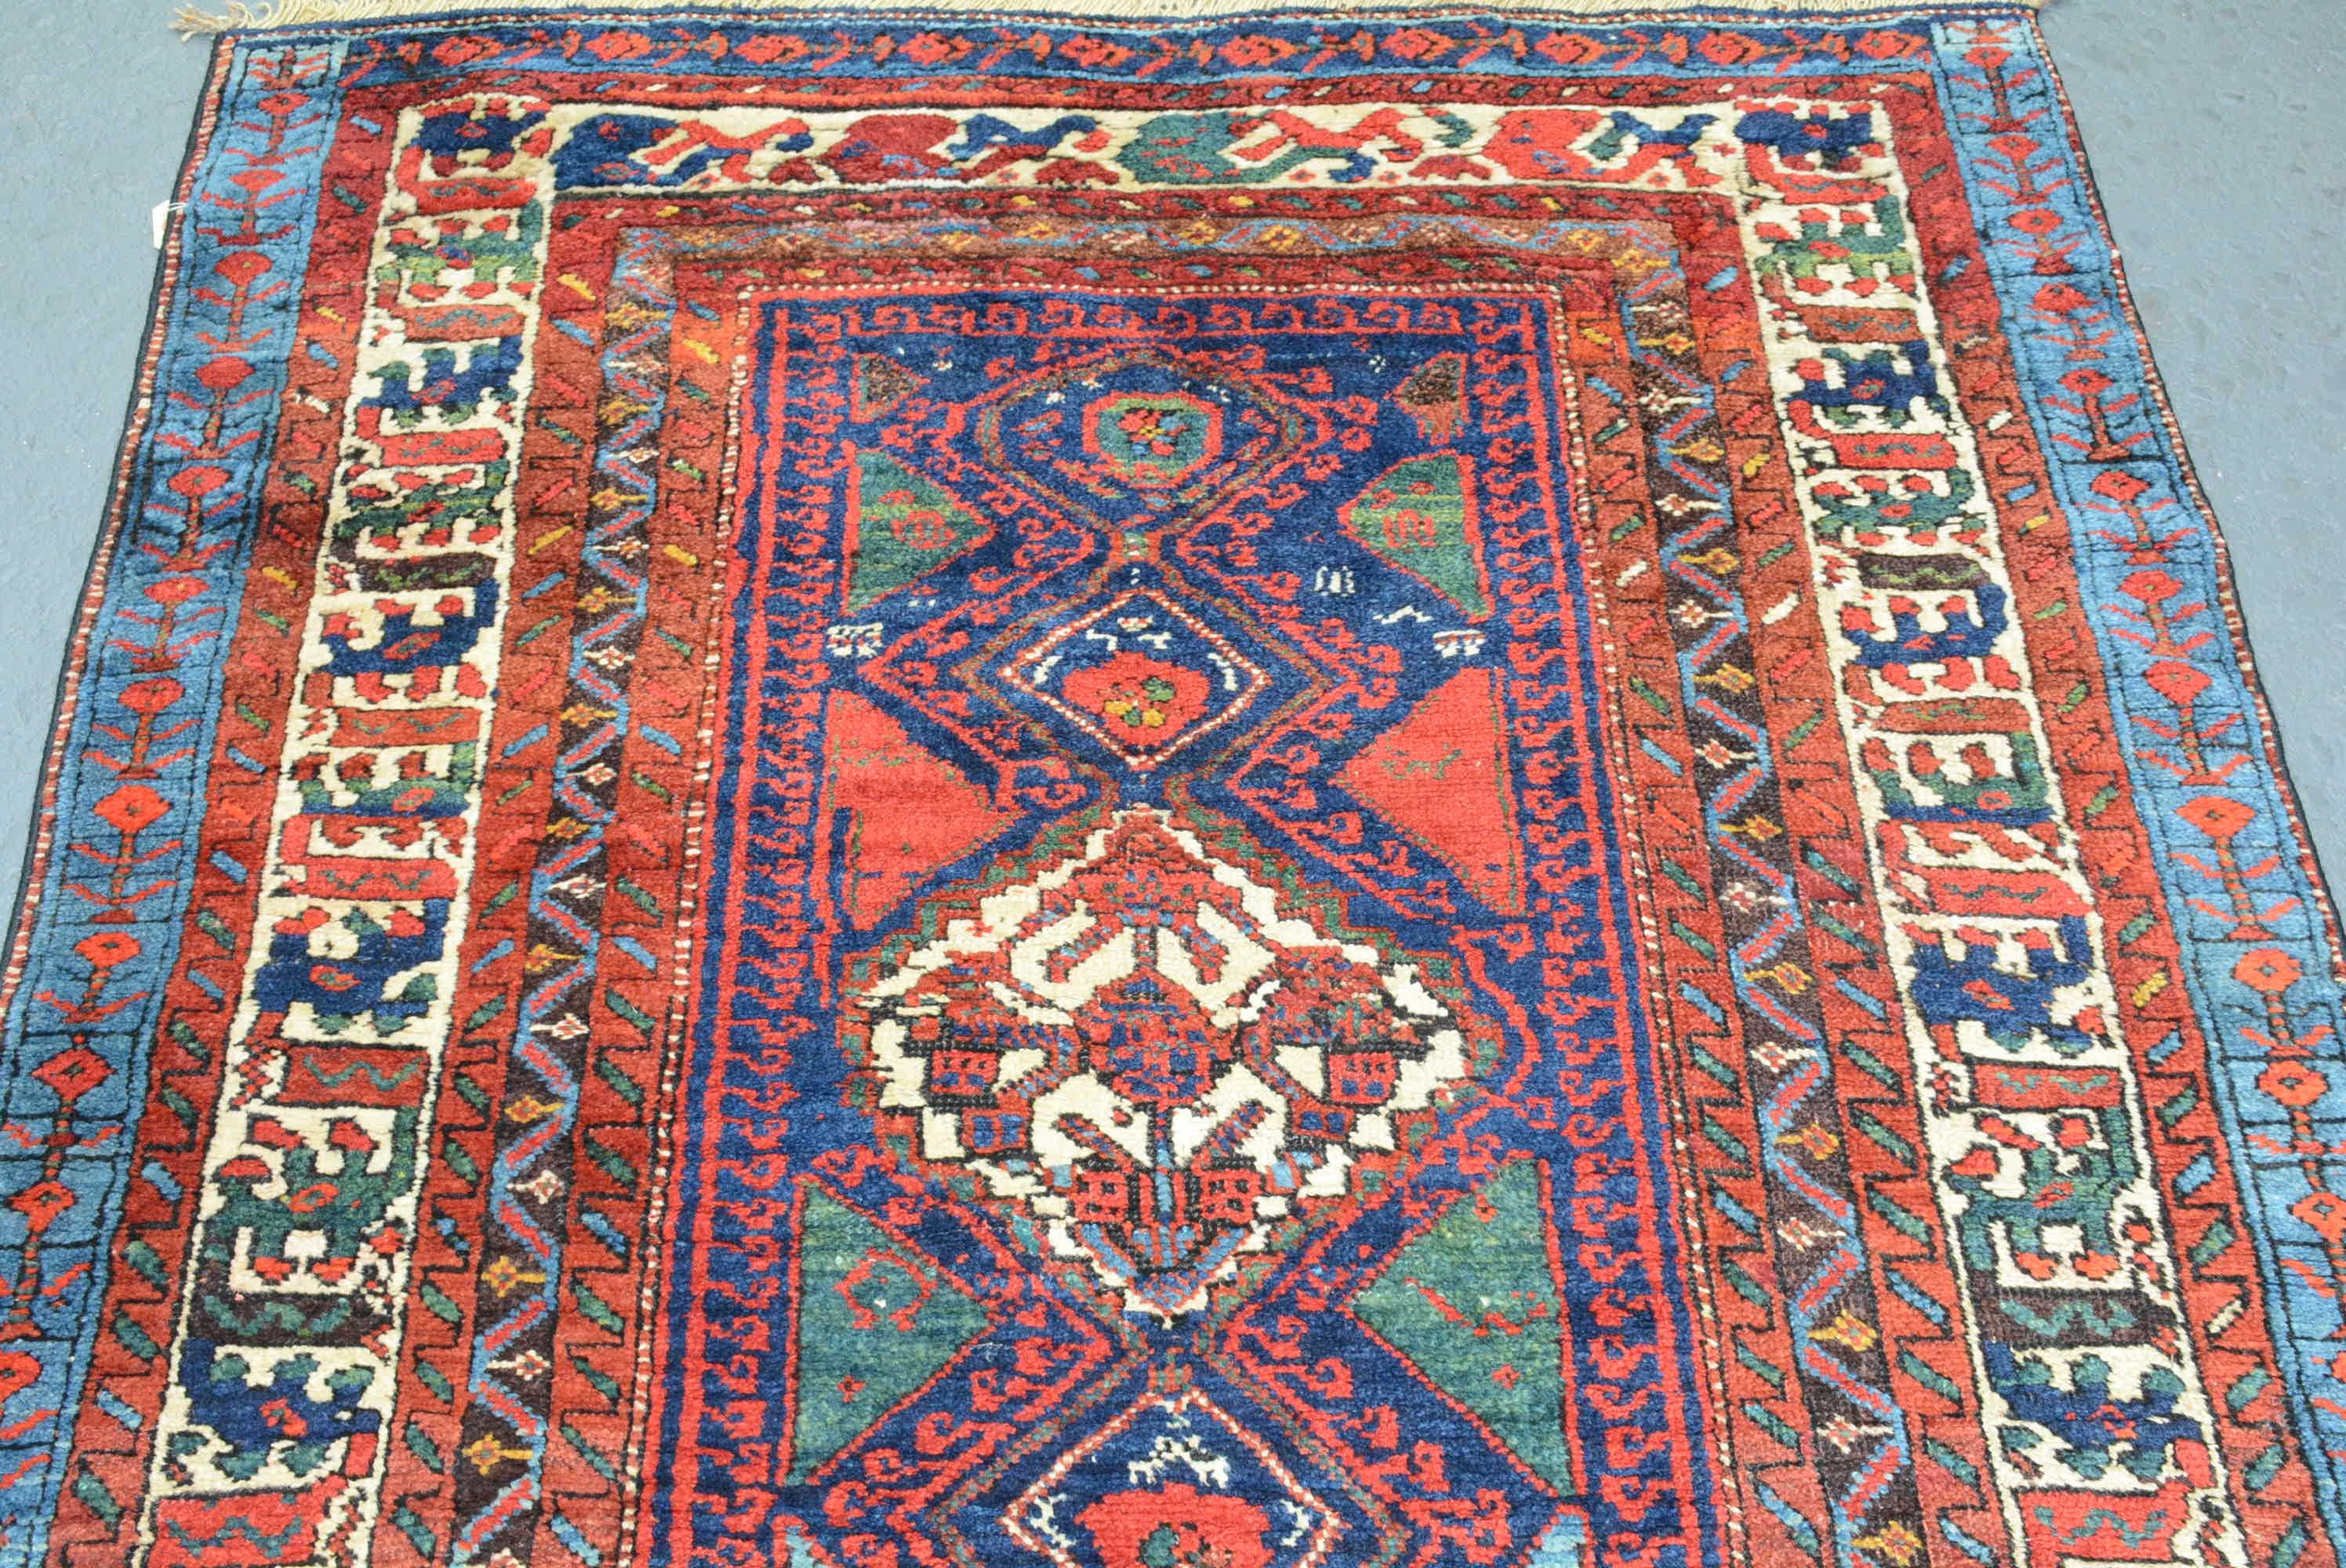 This graphic Bidjar rug woven by the Kurdish population in northern Persia has a wool foundation. Circa 1900, Measures: 5' 2